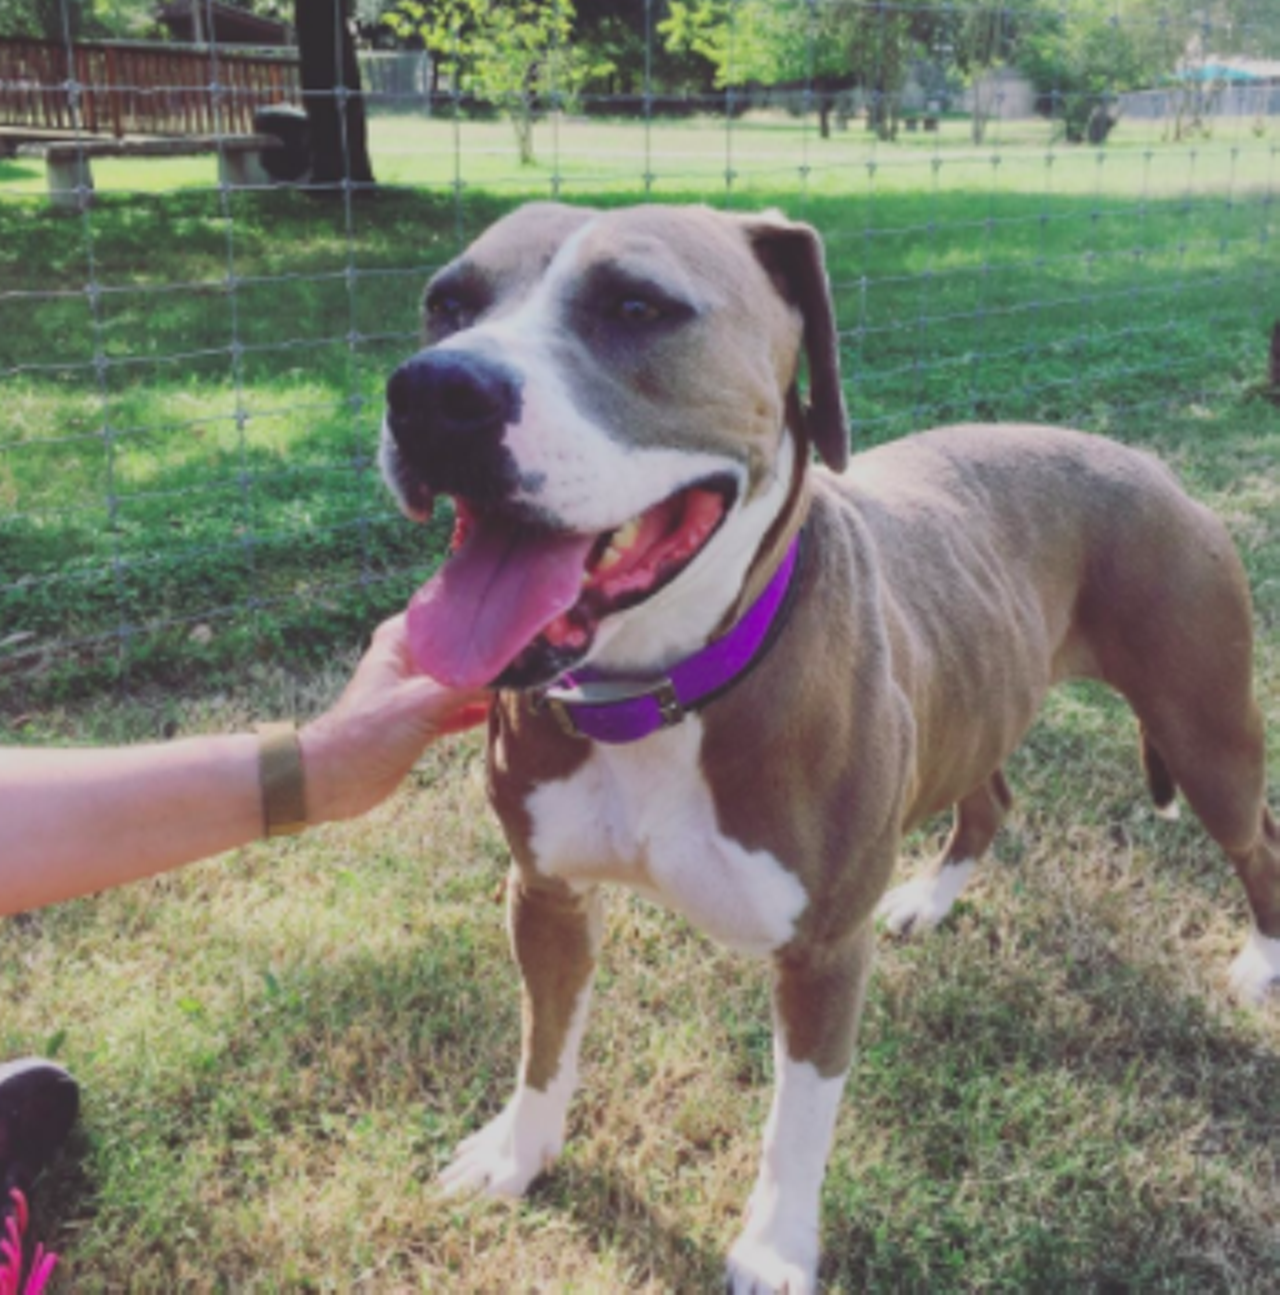 Myra
“Hi, my name is Myra. I am a 3 year old American Staffordshire Terrier mix. I’m brown and white. I like to be goofy and play with you. I’m strong so I will need some training on the leash. I am friendly and would like to go home with you!”